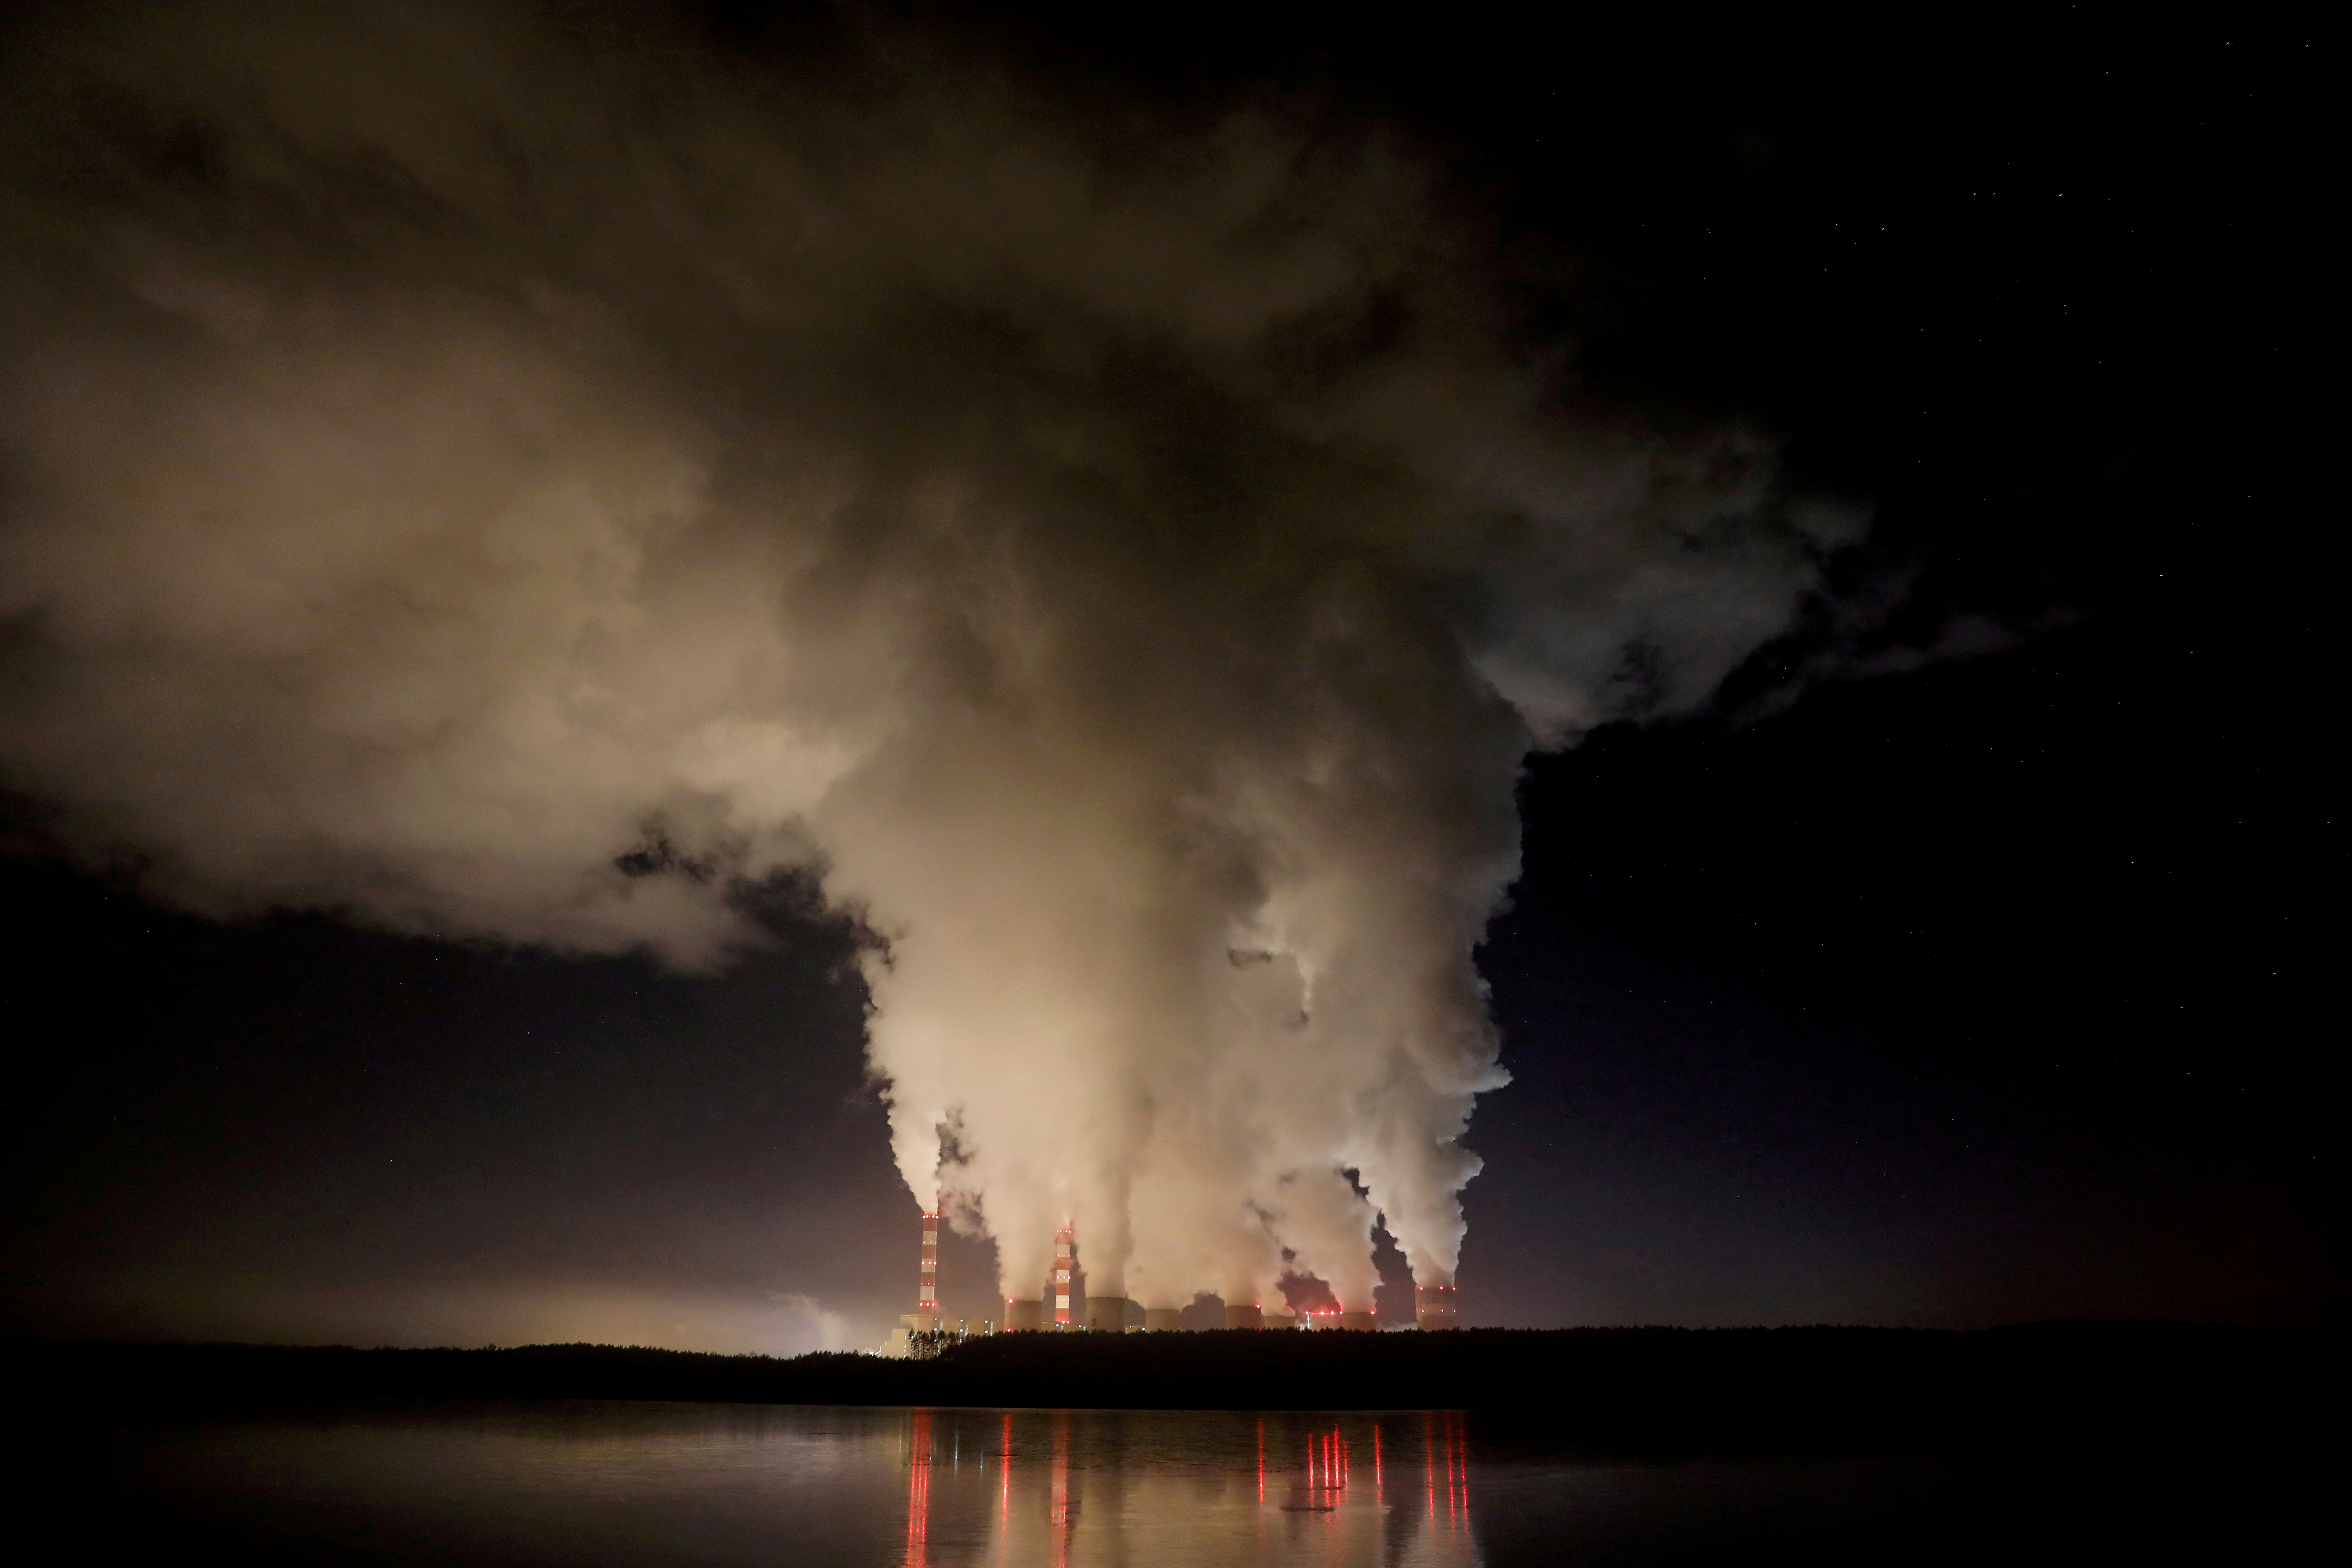 Smoke and steam billow from Belchatow Power Station, Europe's largest coal-fired power plant, operated by PGE Group, at night near Belchatow, Poland December 5, 2018. REUTERS/Kacper Pempel/File Photo